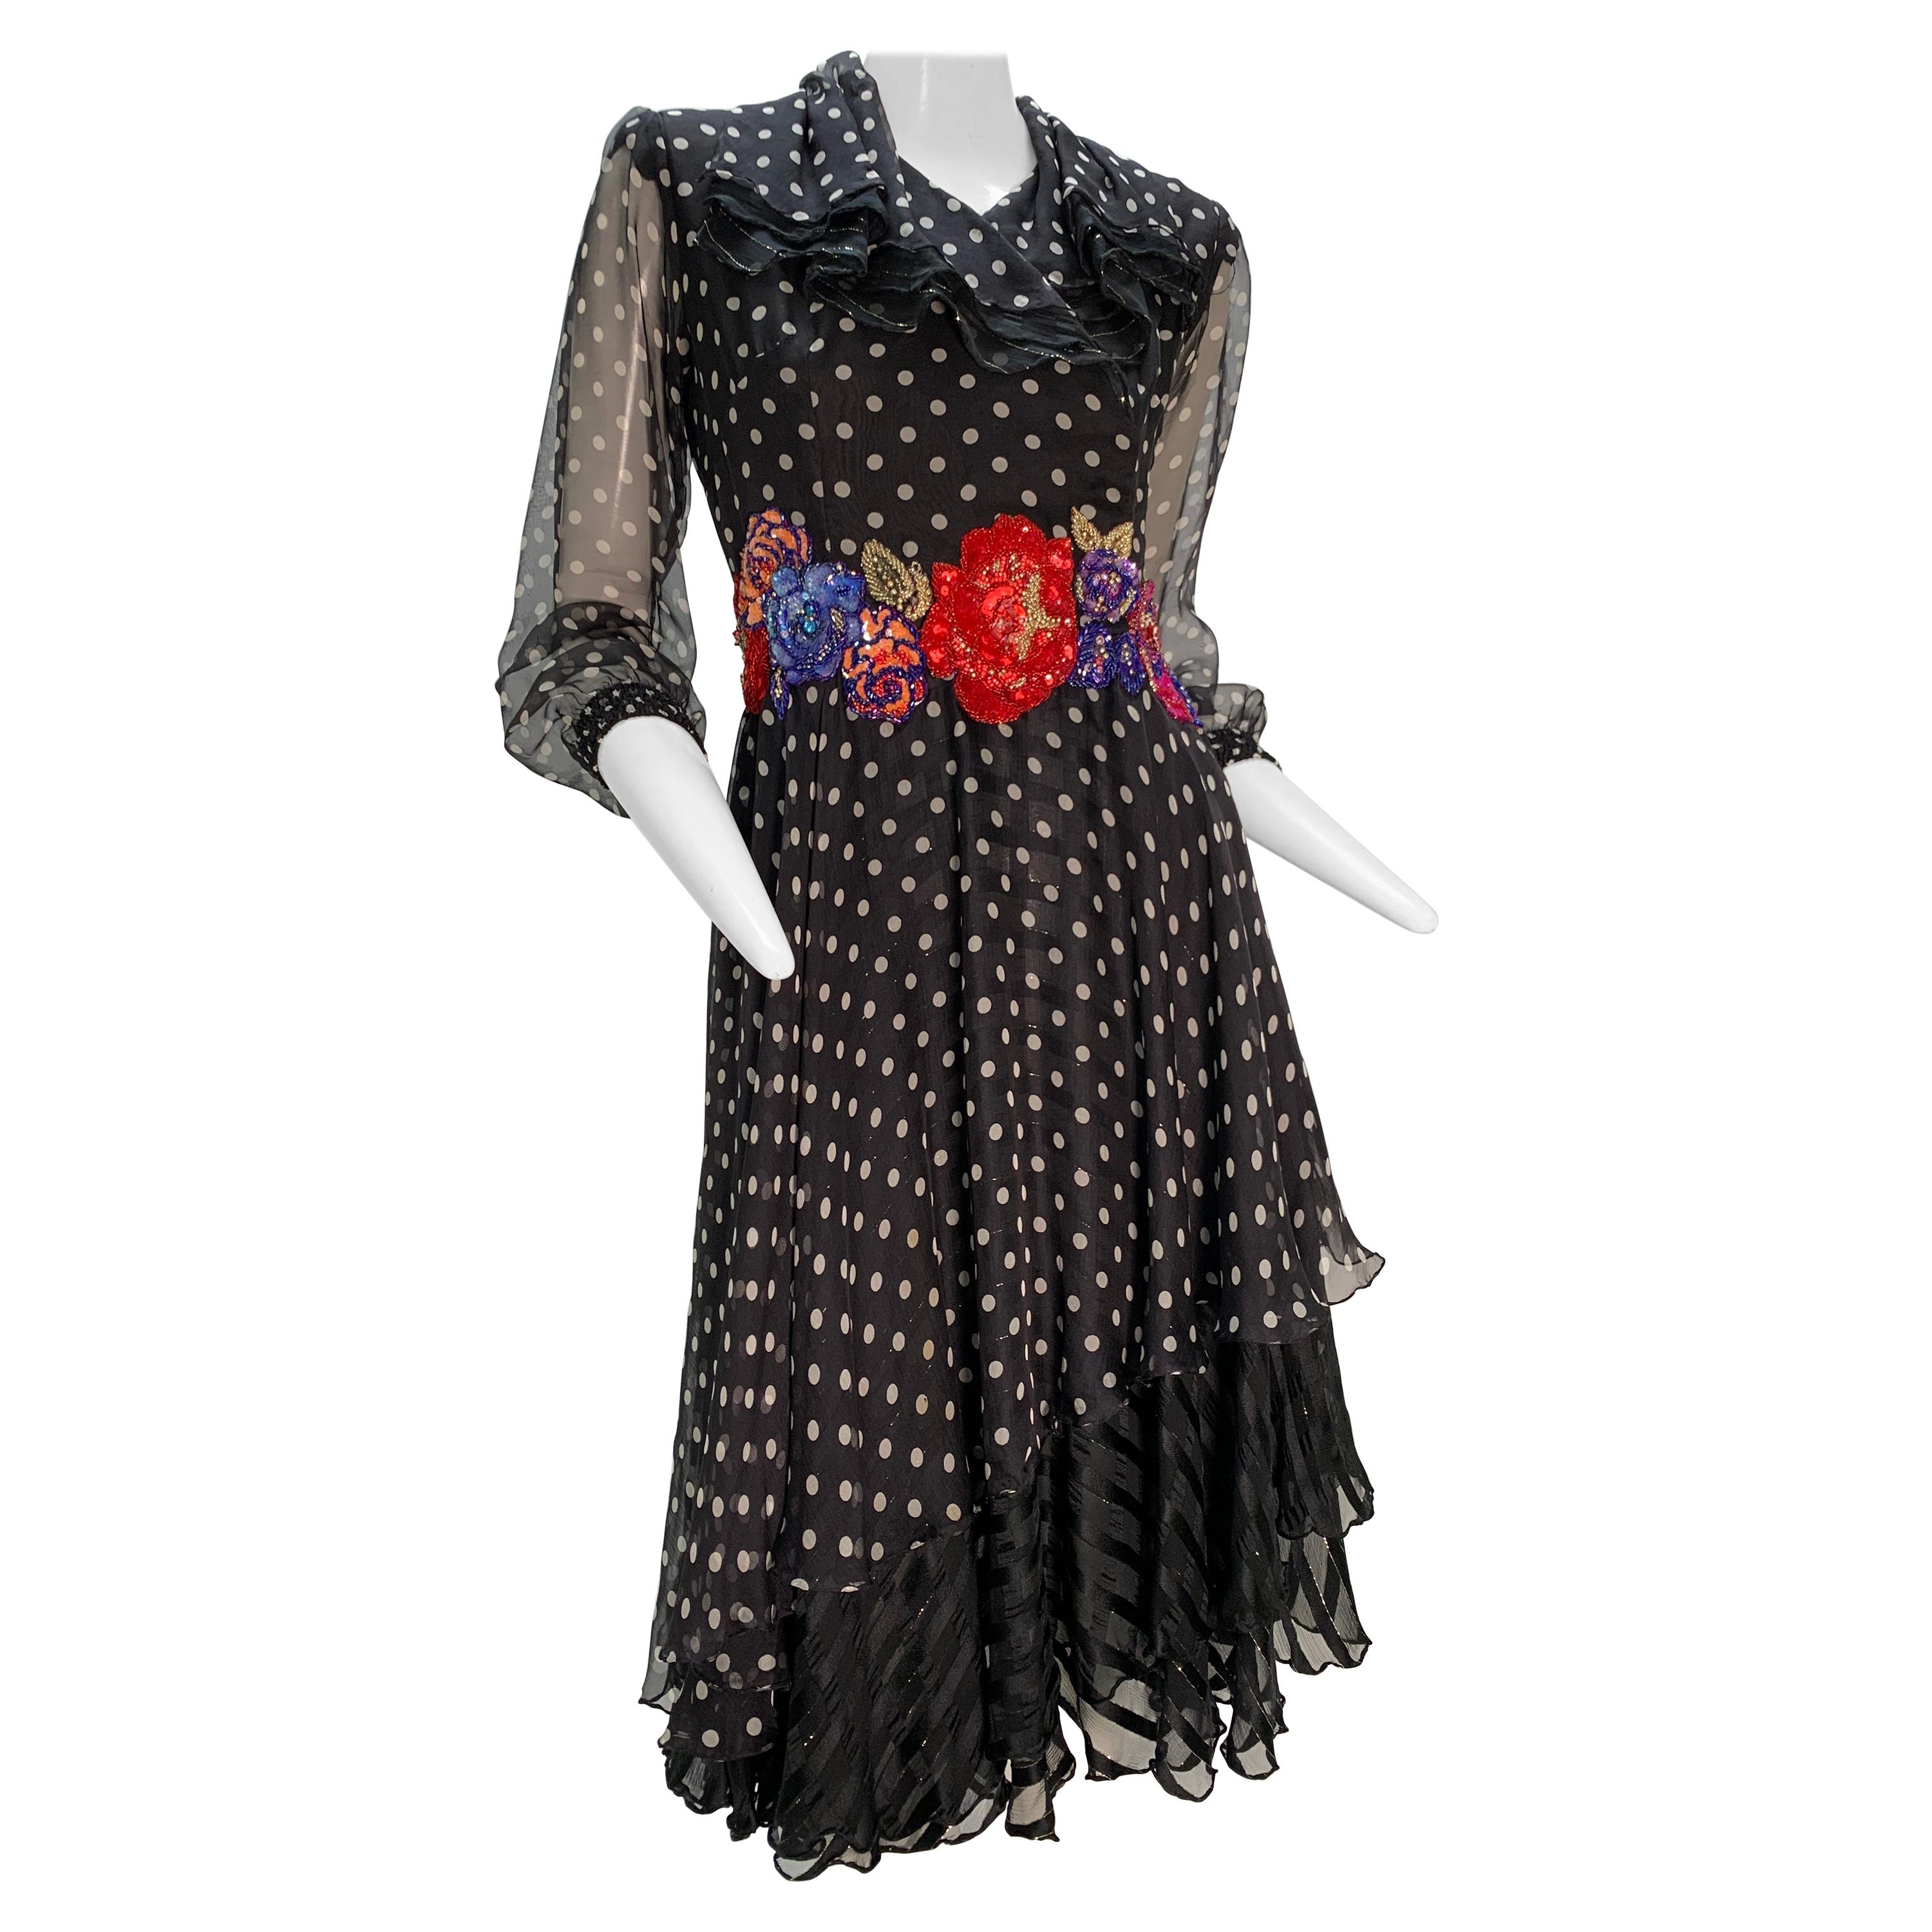 1980 Whimsical Silk Chiffon Polka Dot Dress W/ Colorful Beaded & Sequin Florals 